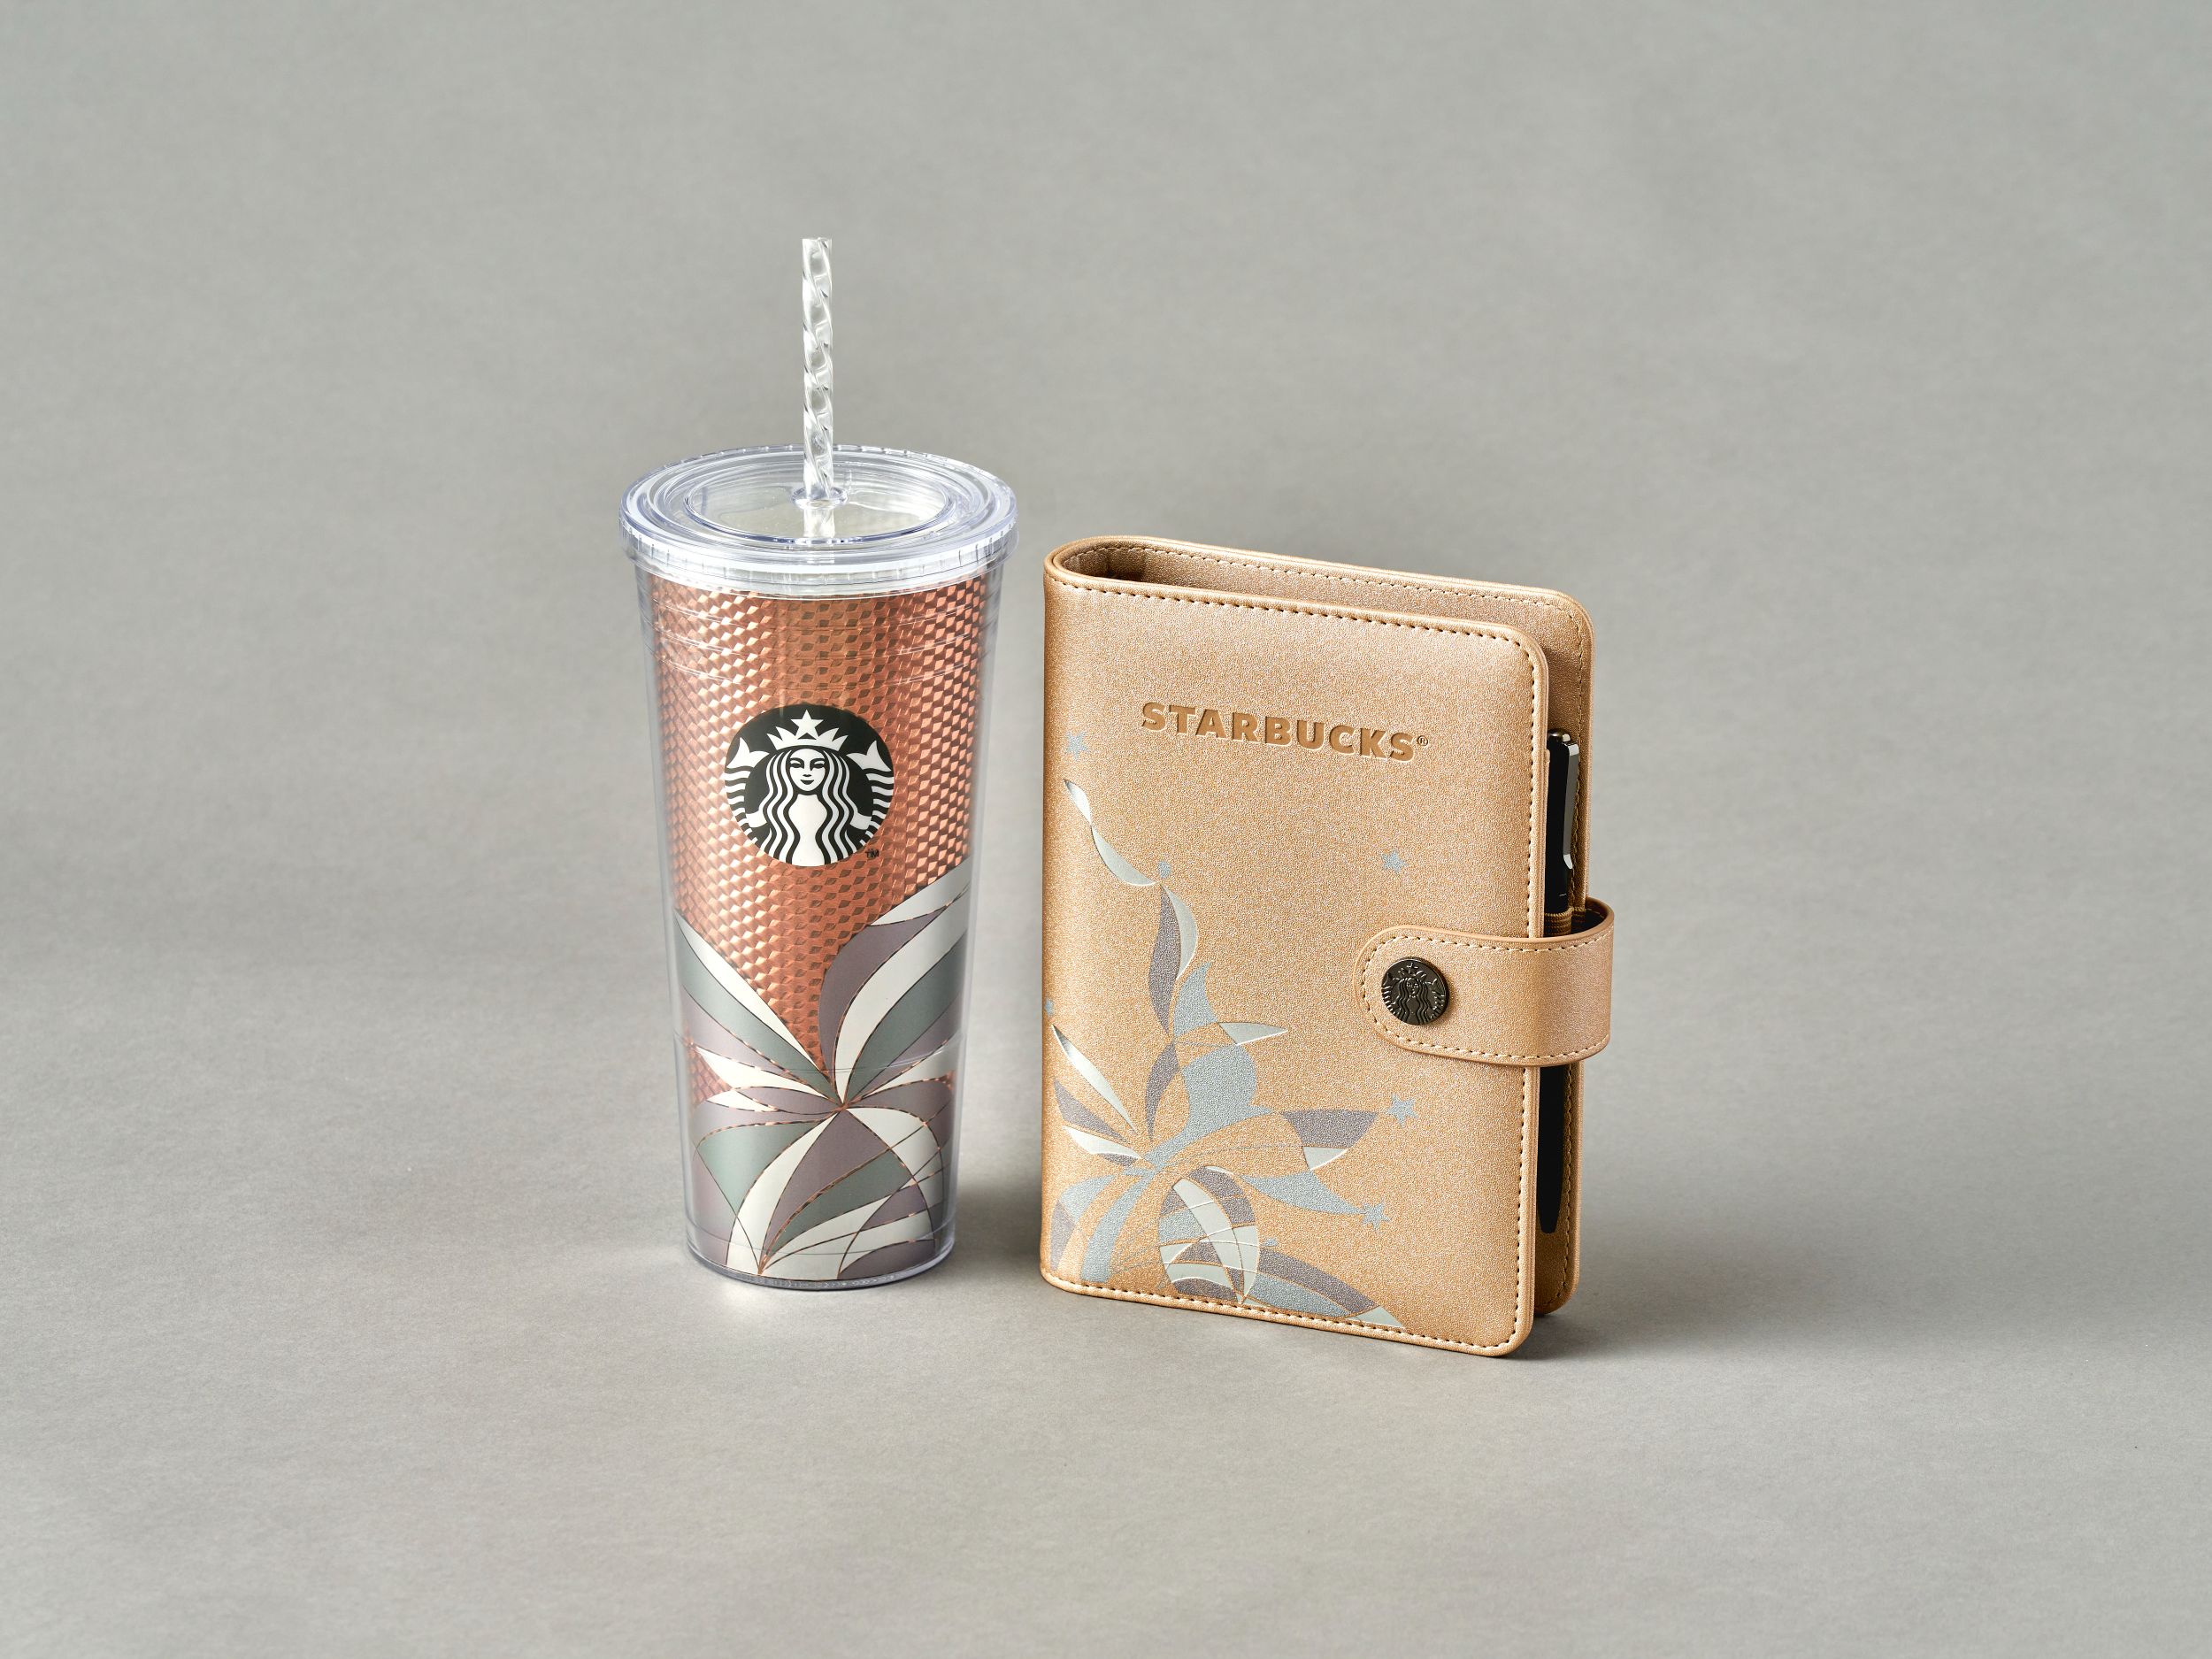 A First Look at the 2023 Starbucks Planner